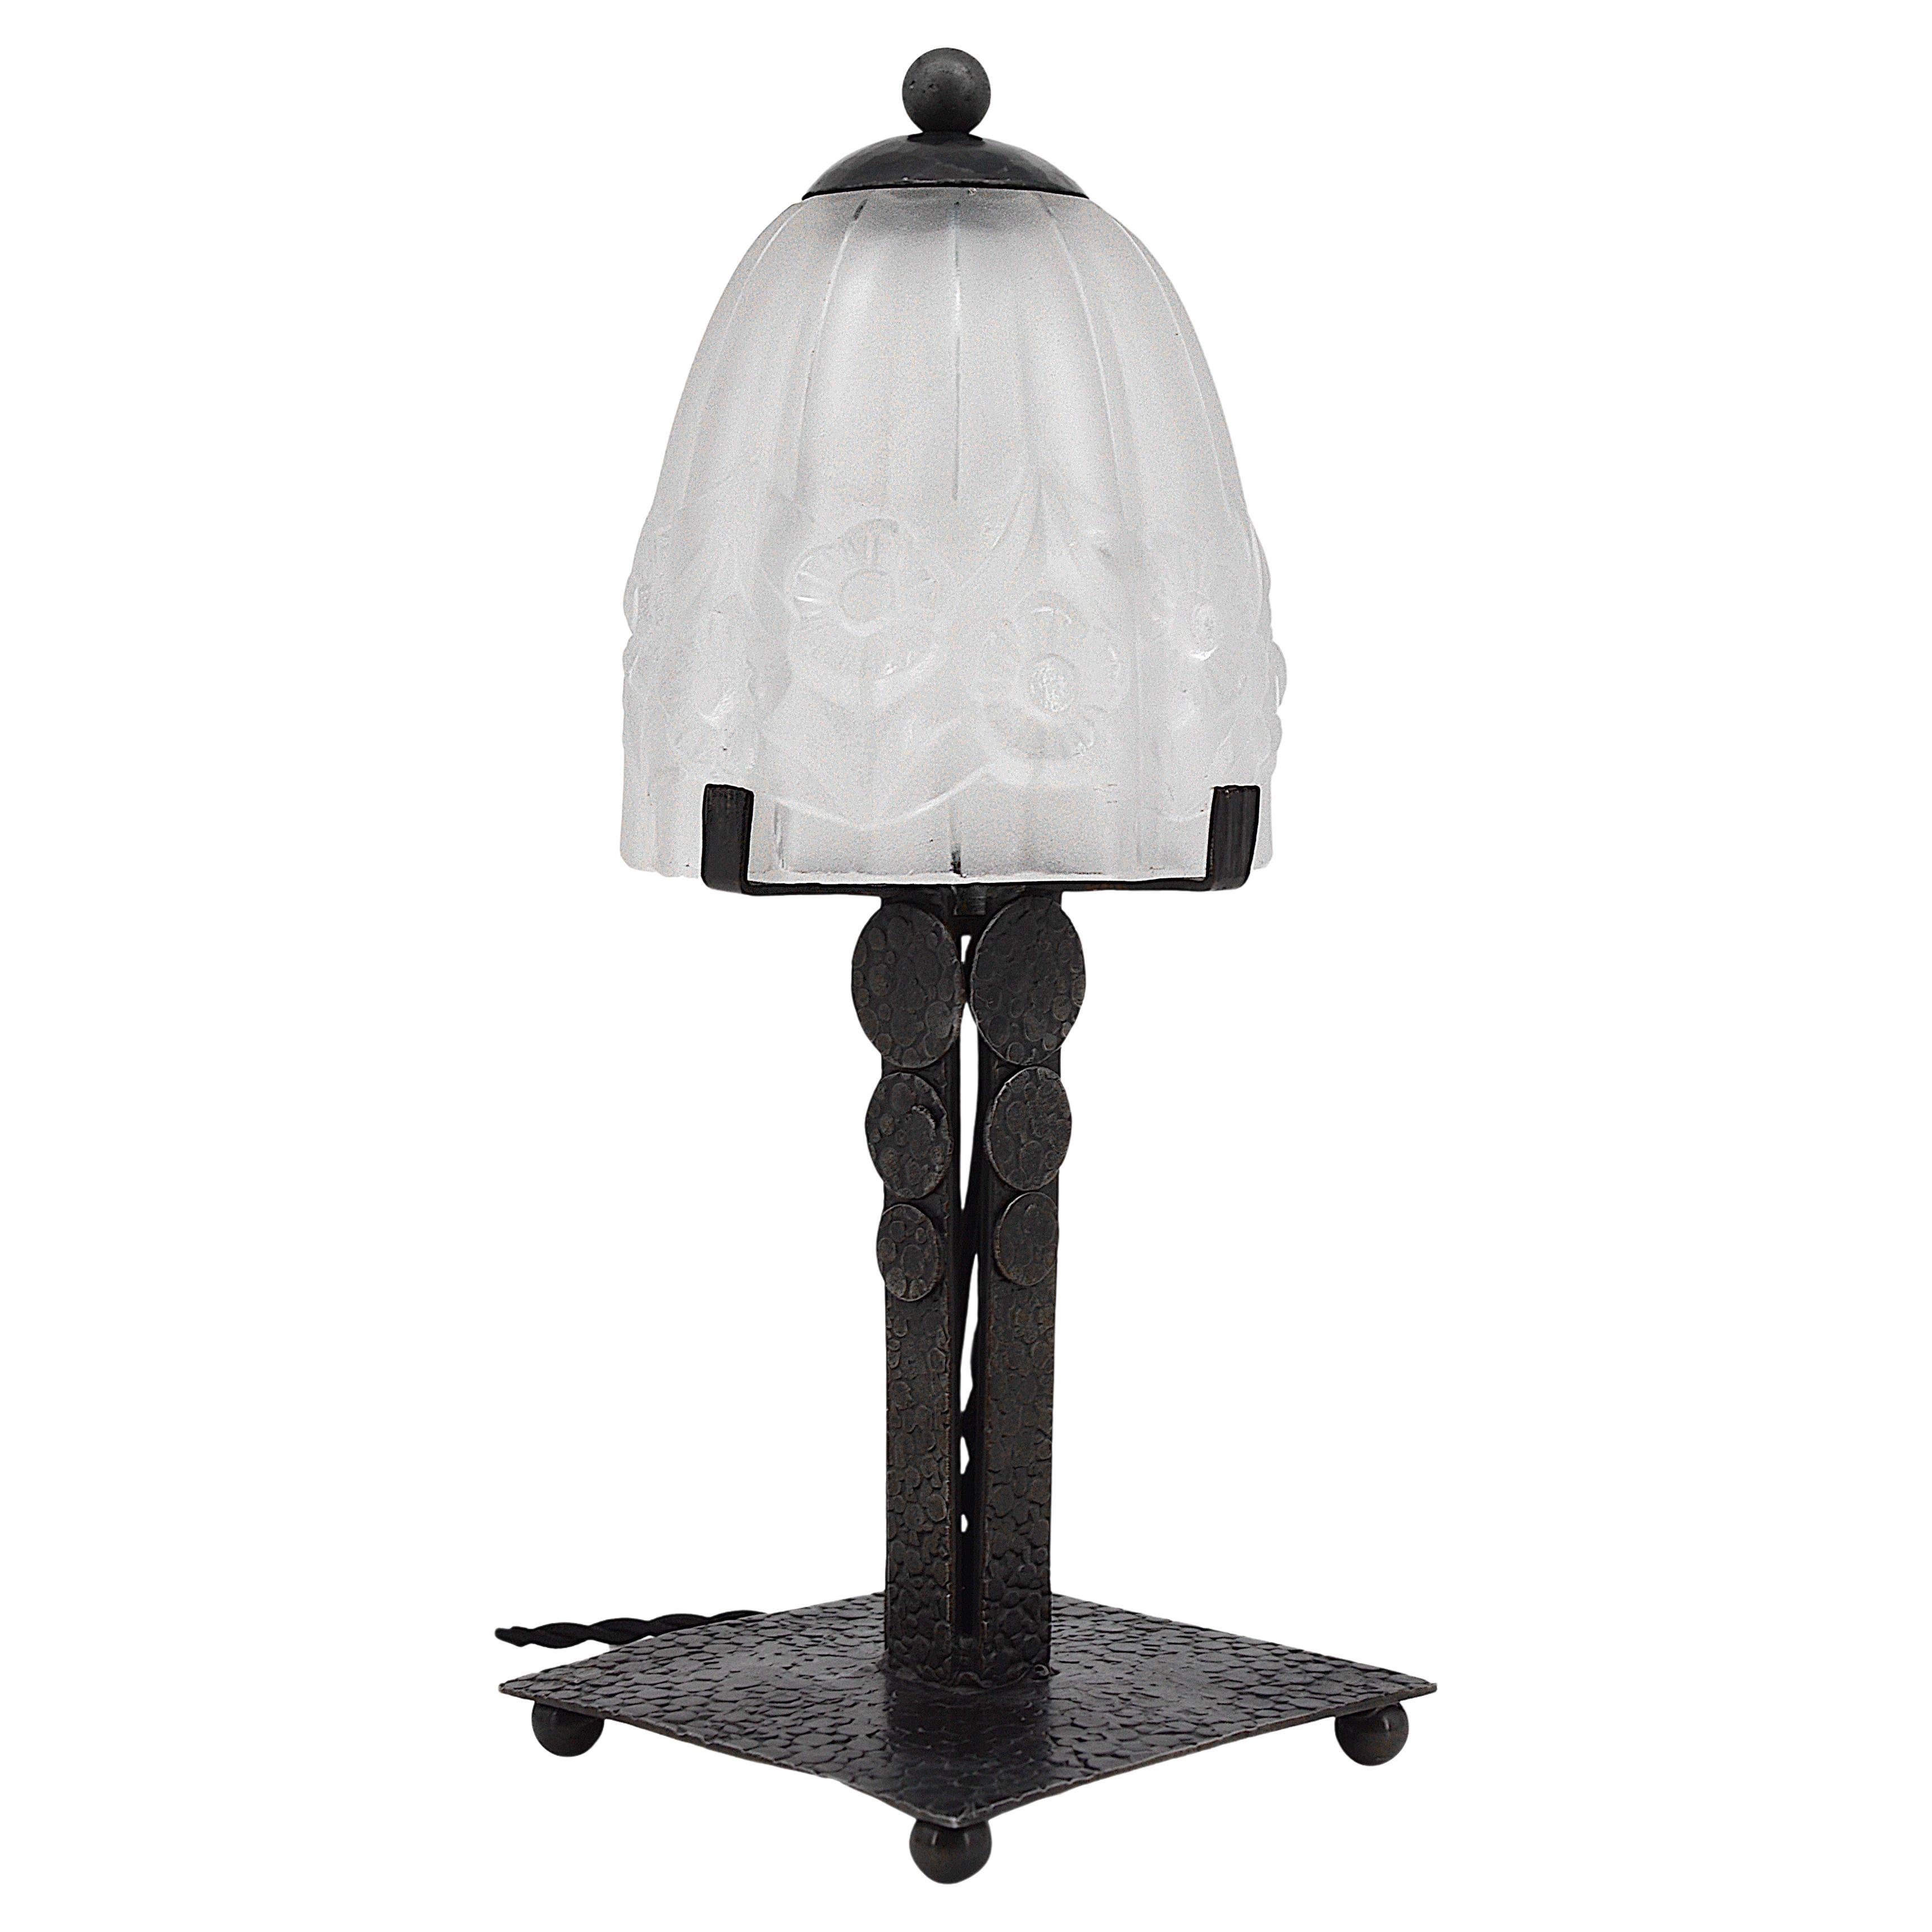 French Art Deco table lamp by Pierre Gilles, 27 rue Esquirol, Paris 13e, France, ca.1930. Thick molded glass shade on its classy wrought-iron base. Measures: Height: 11